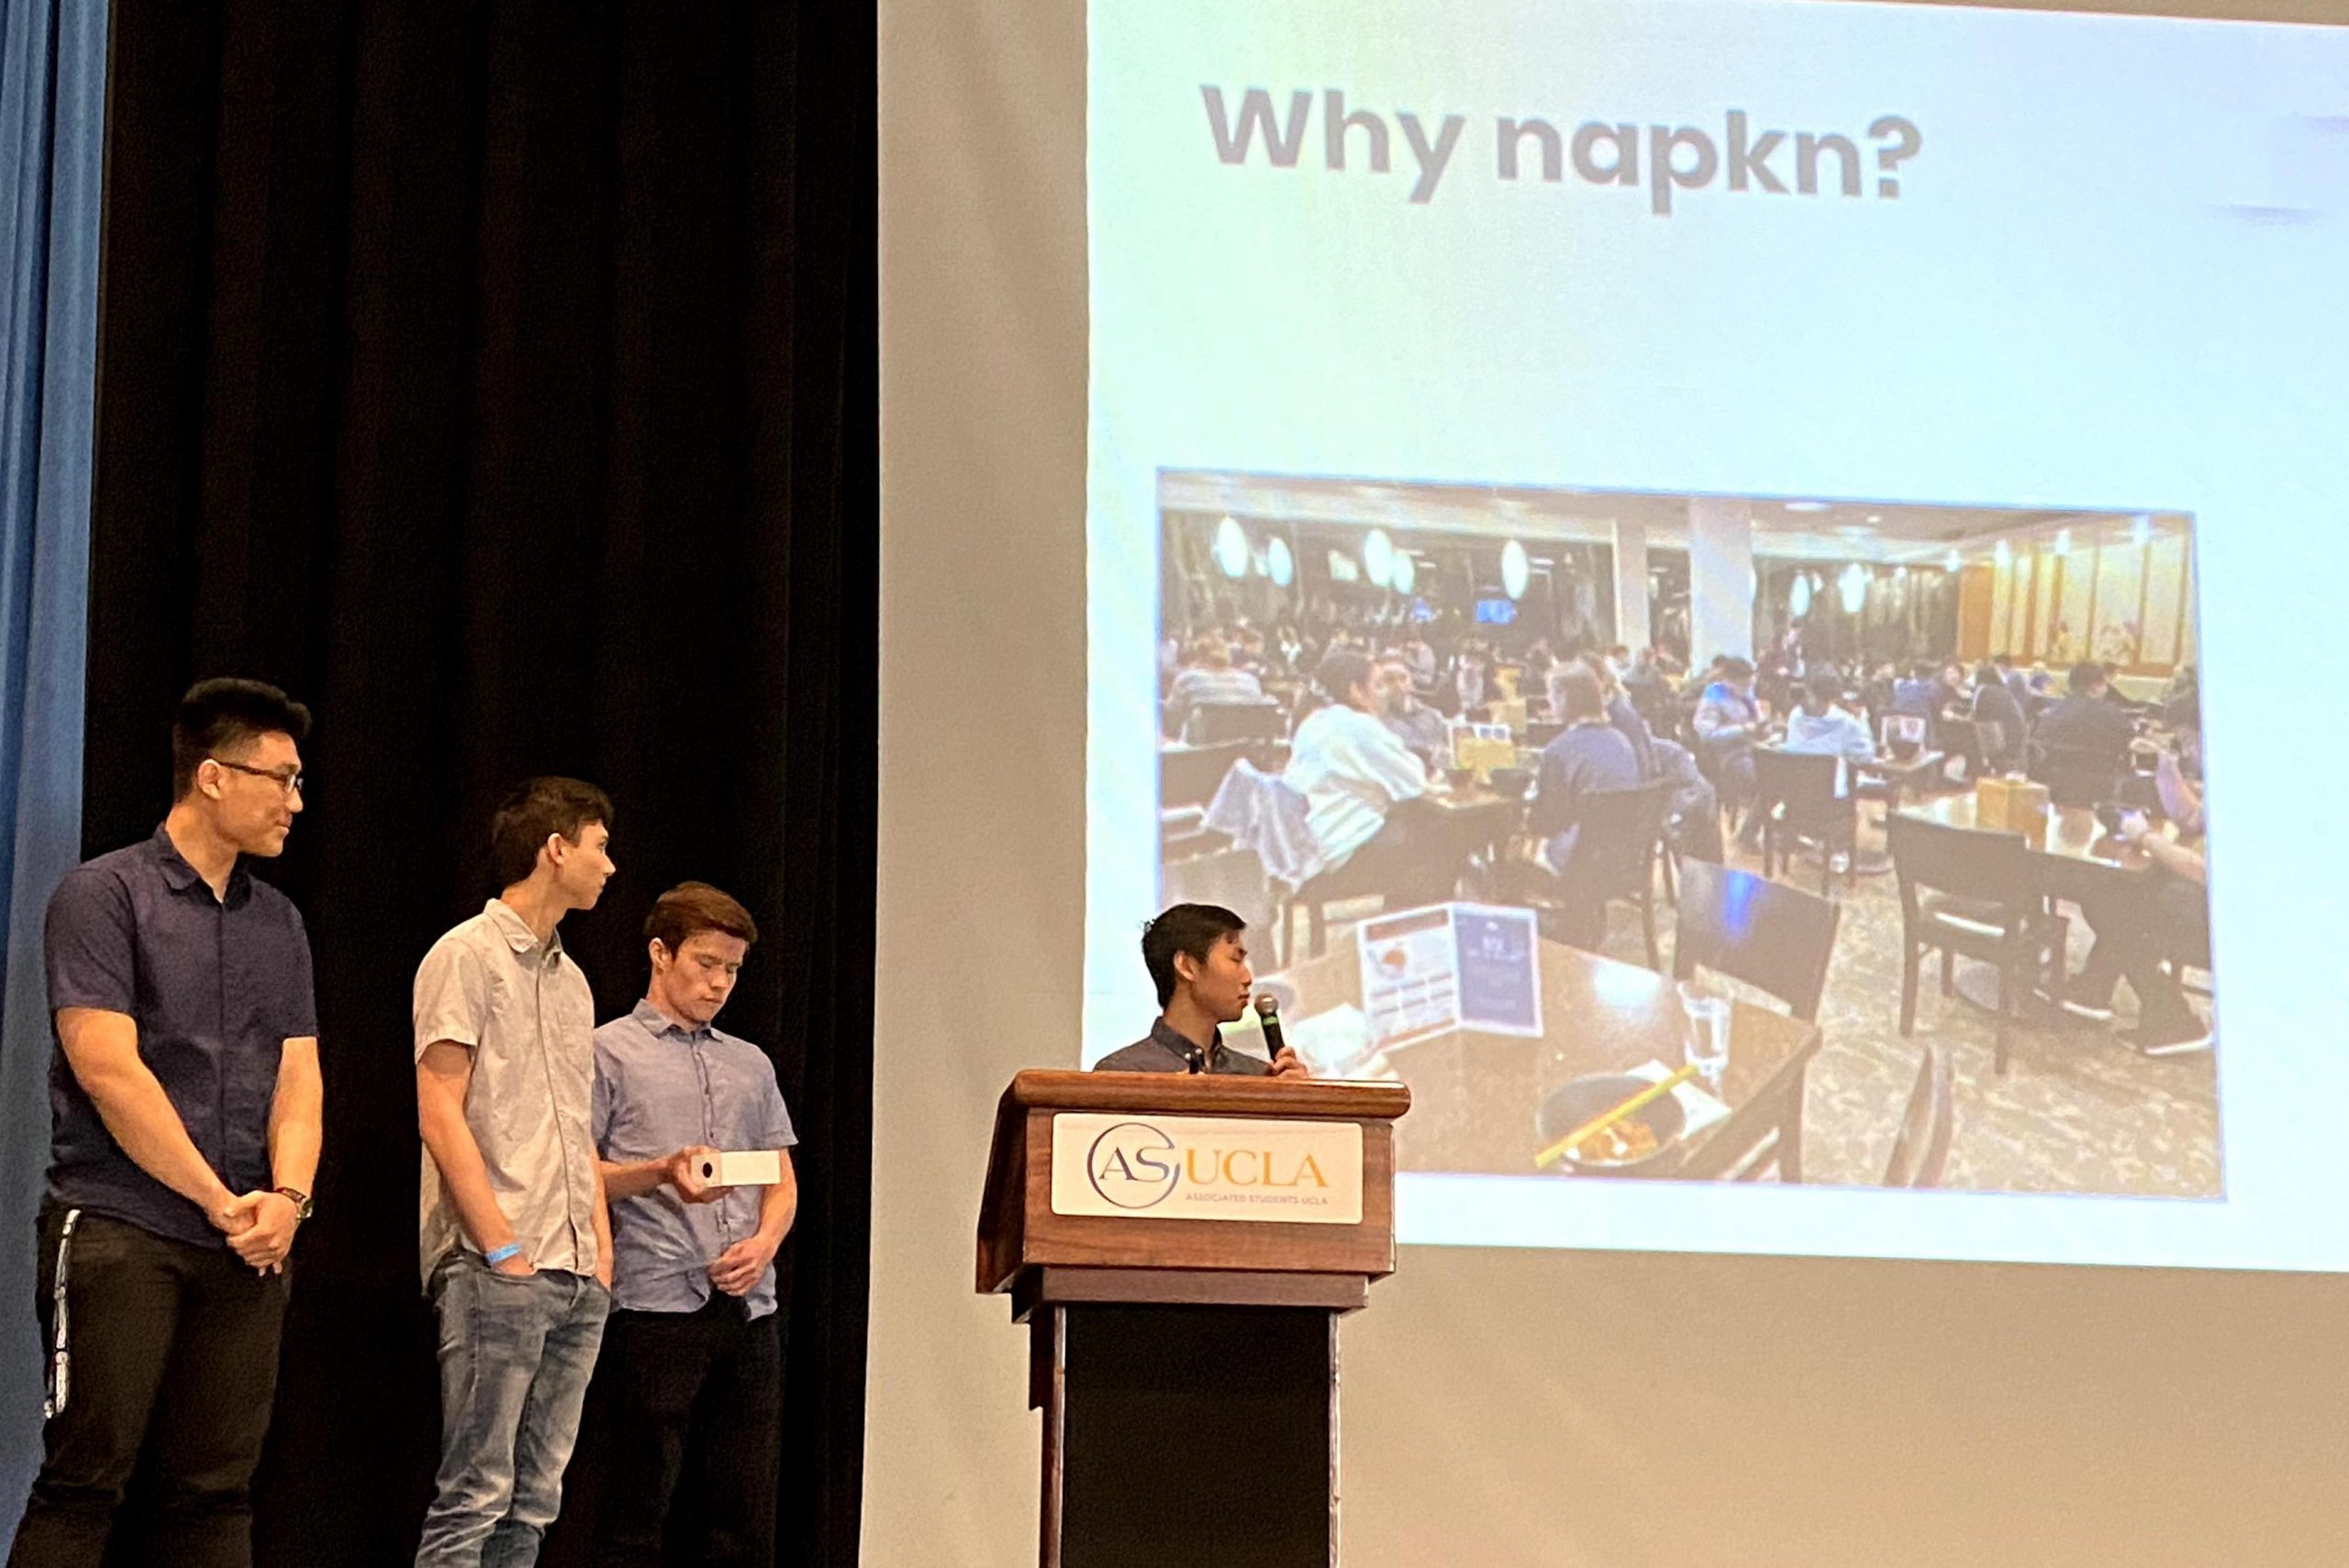 Napkn Team on stage presenting their work to the judges